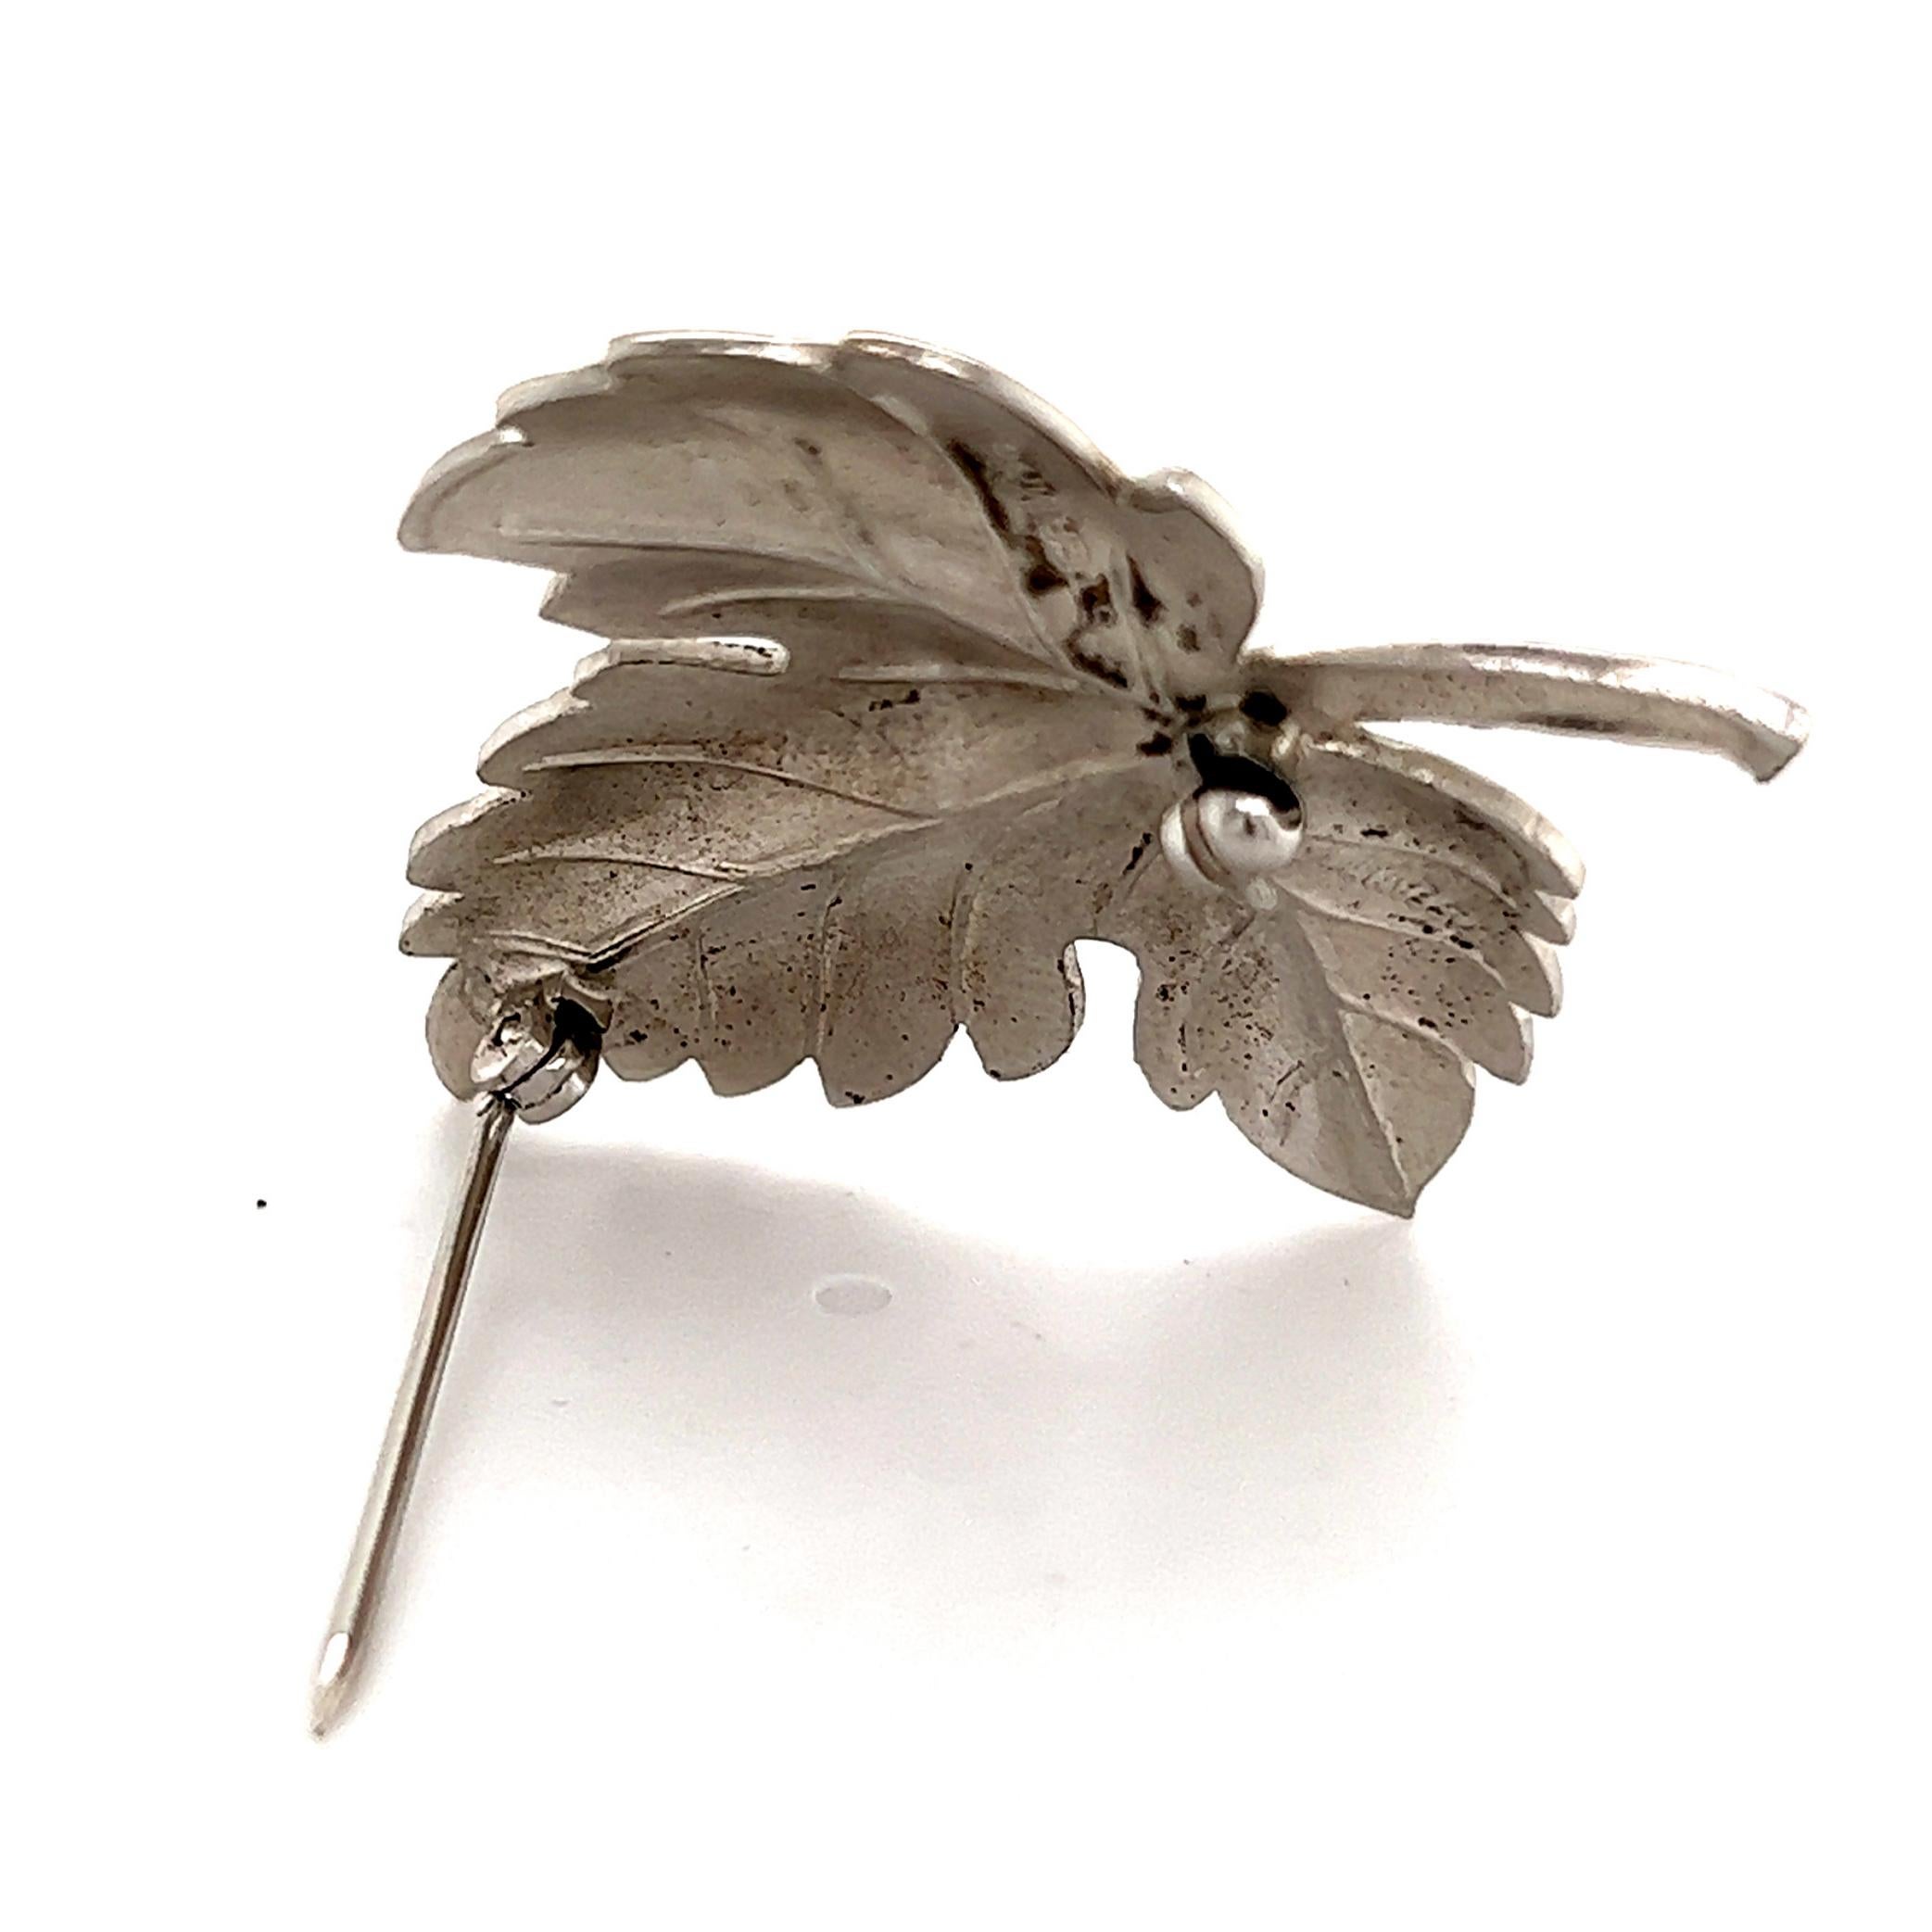 Authentic Tiffany & Co Estate Leaf Brooch Pin Sterling Silver 7 Grams TIF390


TRUSTED SELLER SINCE 2002

PLEASE SEE OUR HUNDREDS OF POSITIVE FEEDBACKS FROM OUR CLIENTS!!

FREE SHIPPING!!

DETAILS
Style: Leaf
Weight: 7 Grams
Metal: Sterling